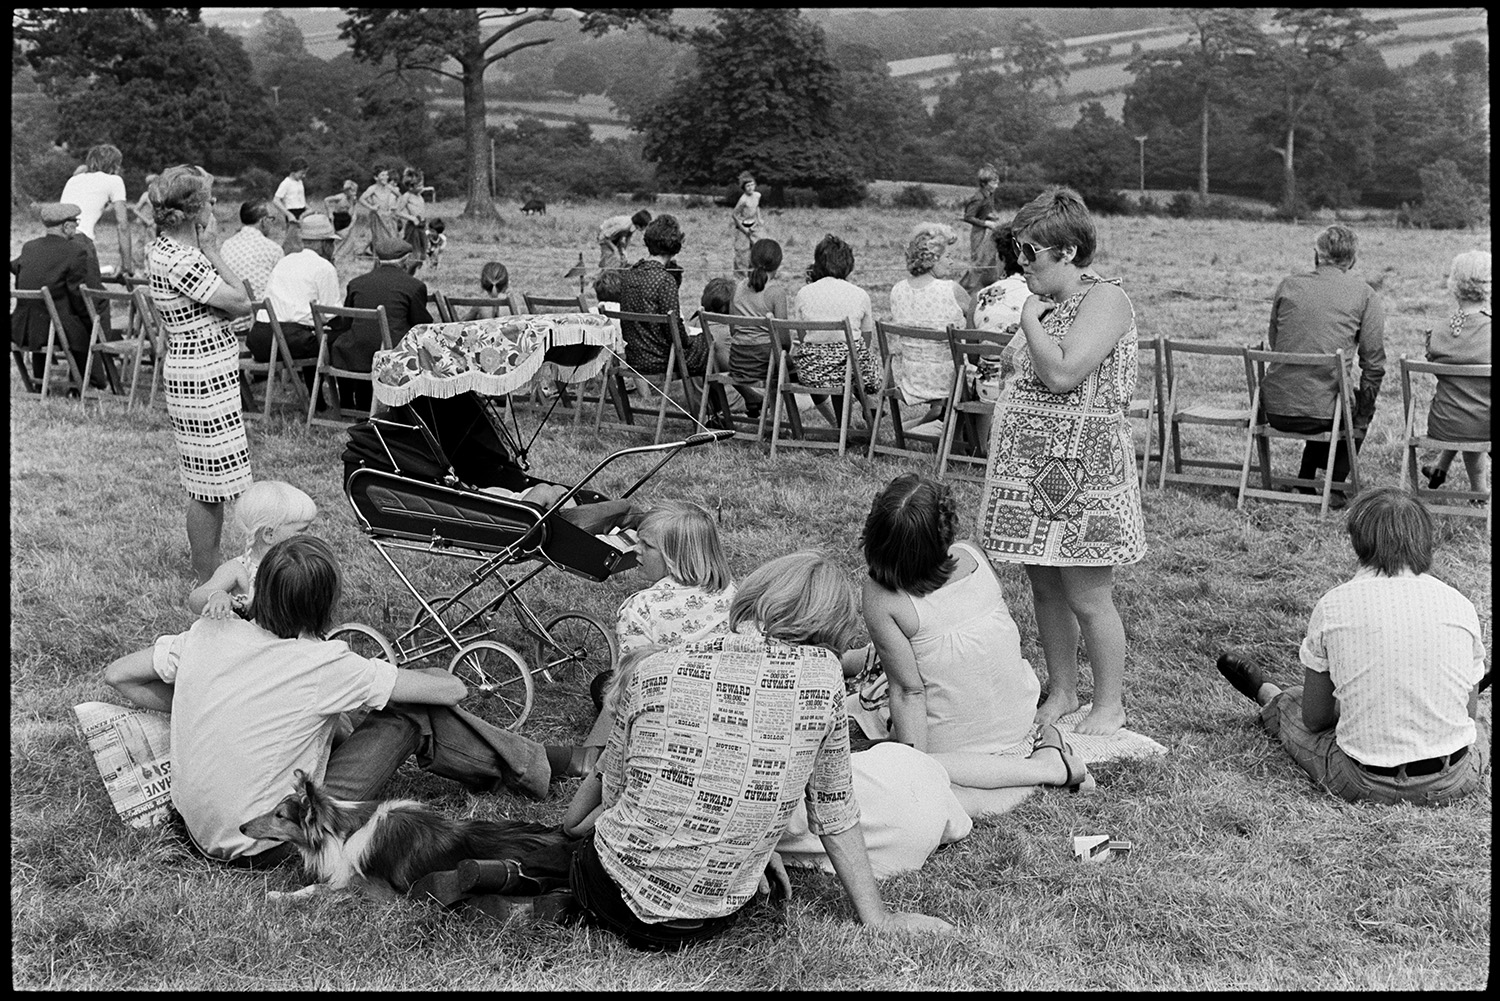 Open air concert, Beaford Event. 
[Spectators sat on chairs in a field at Nethercott, Iddesleigh waiting for an open air concert by Michael Nyman and his band. The event was organised by The Beaford Centre. A family are sat in the foreground with a pram and dog.]